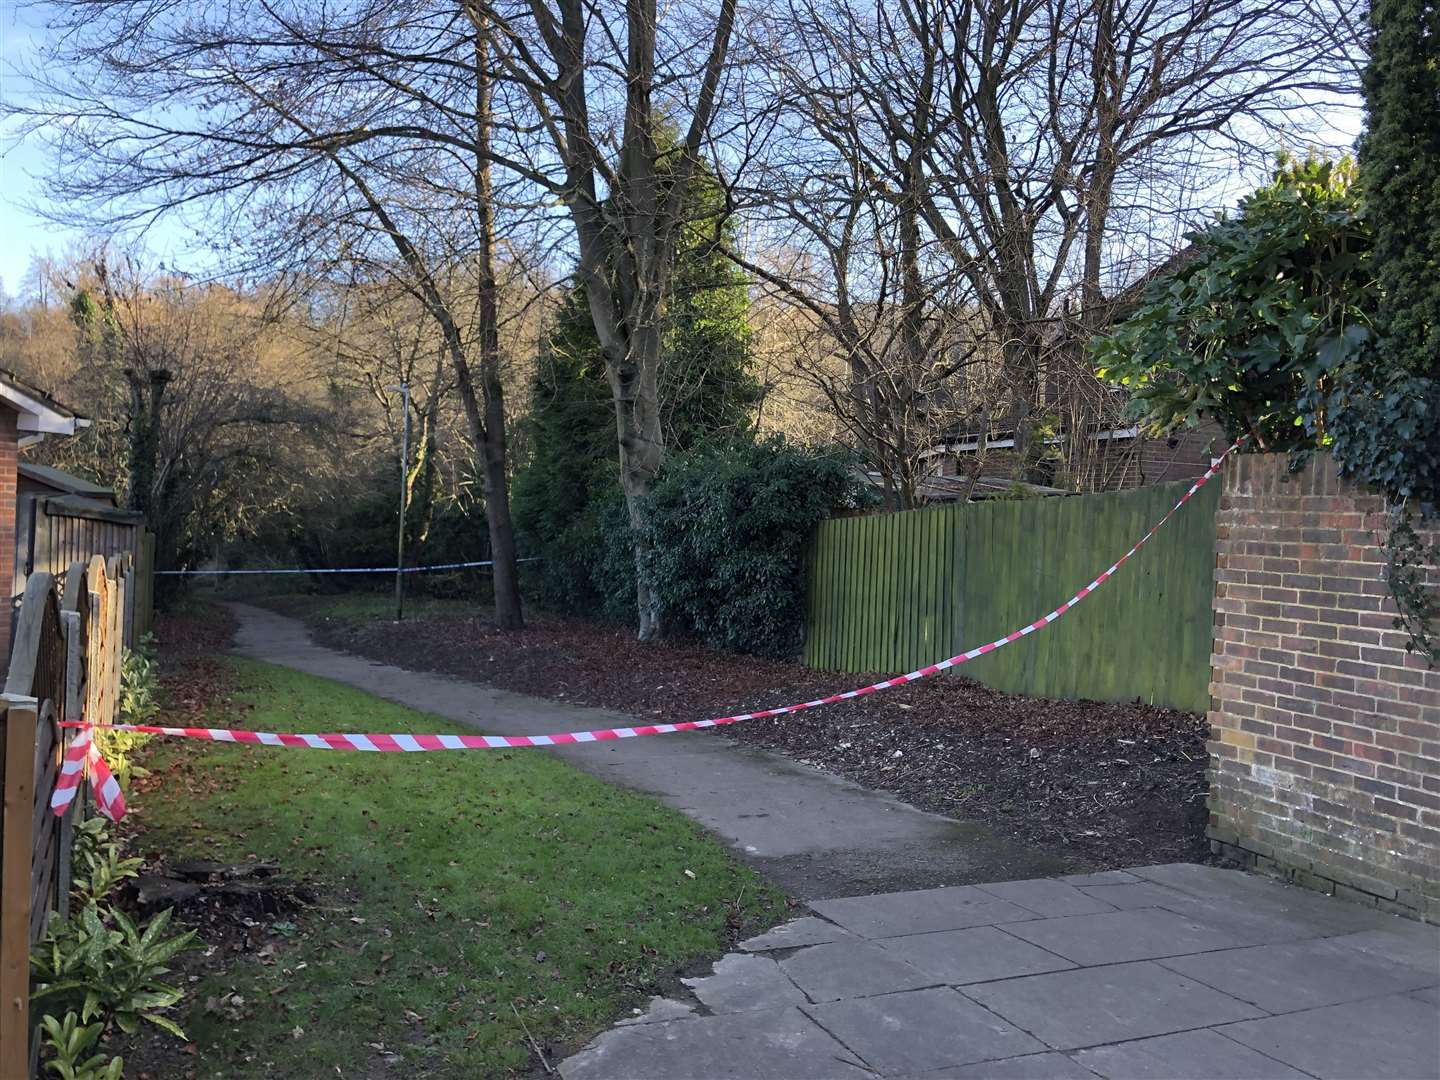 Part of the footpath behind the property has been cordoned off